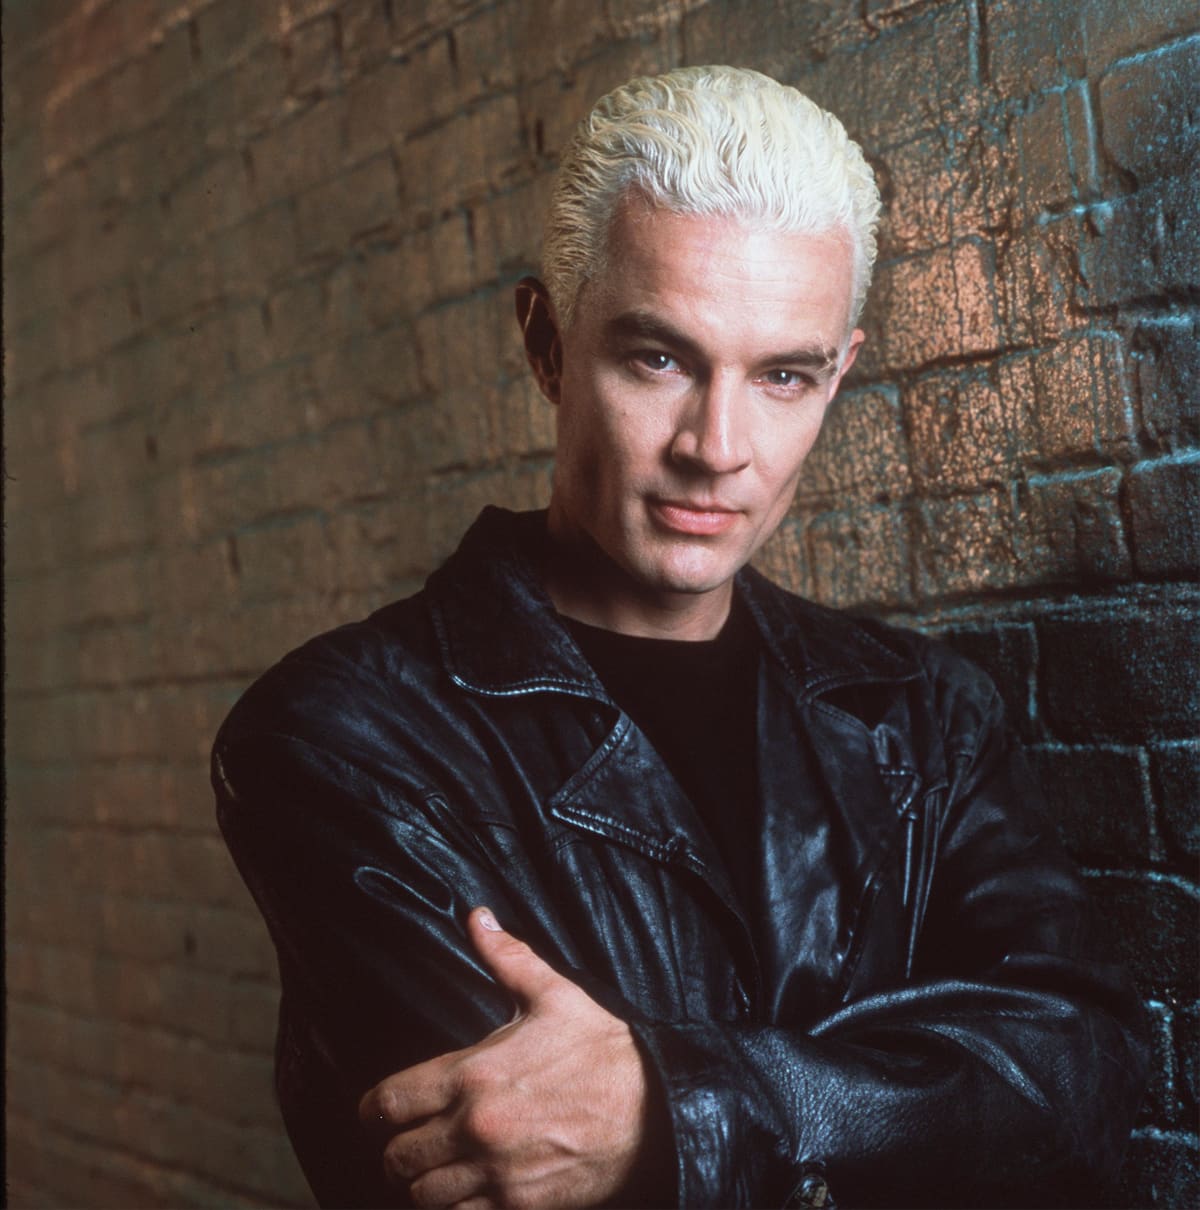 James Marsters as Spike starring in 20th Century Fox's "Buffy The Vampire Slayer Year 5."